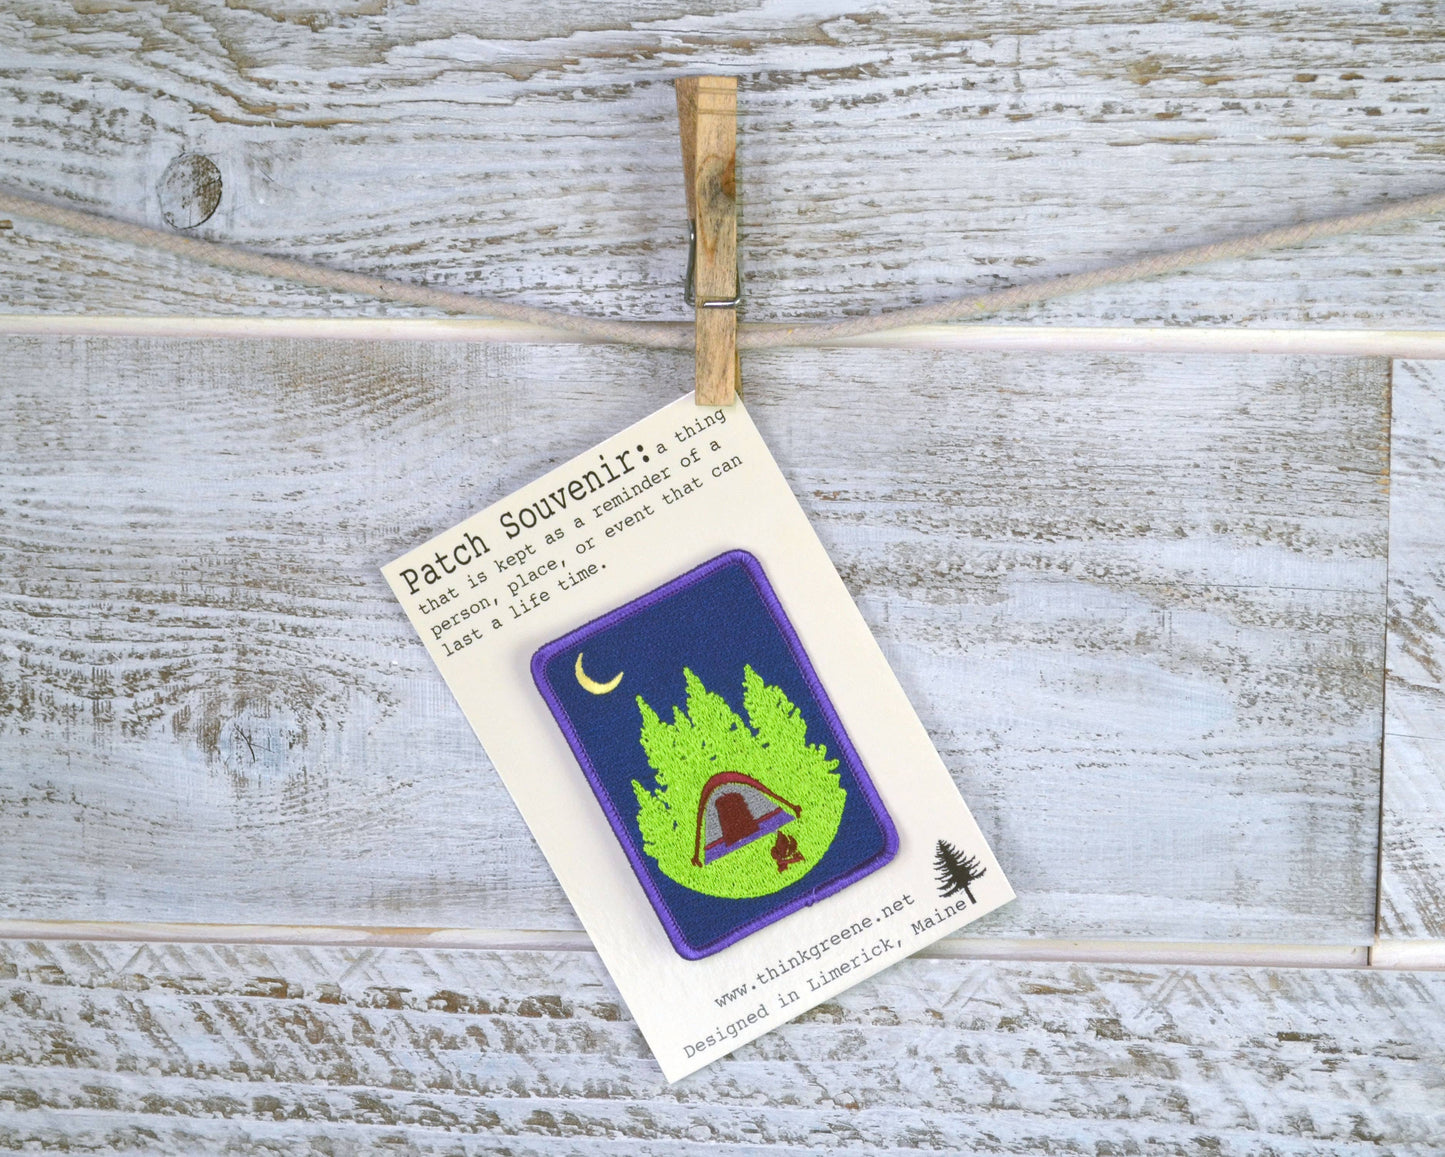 Camp Under the Moon Embroidered Patch